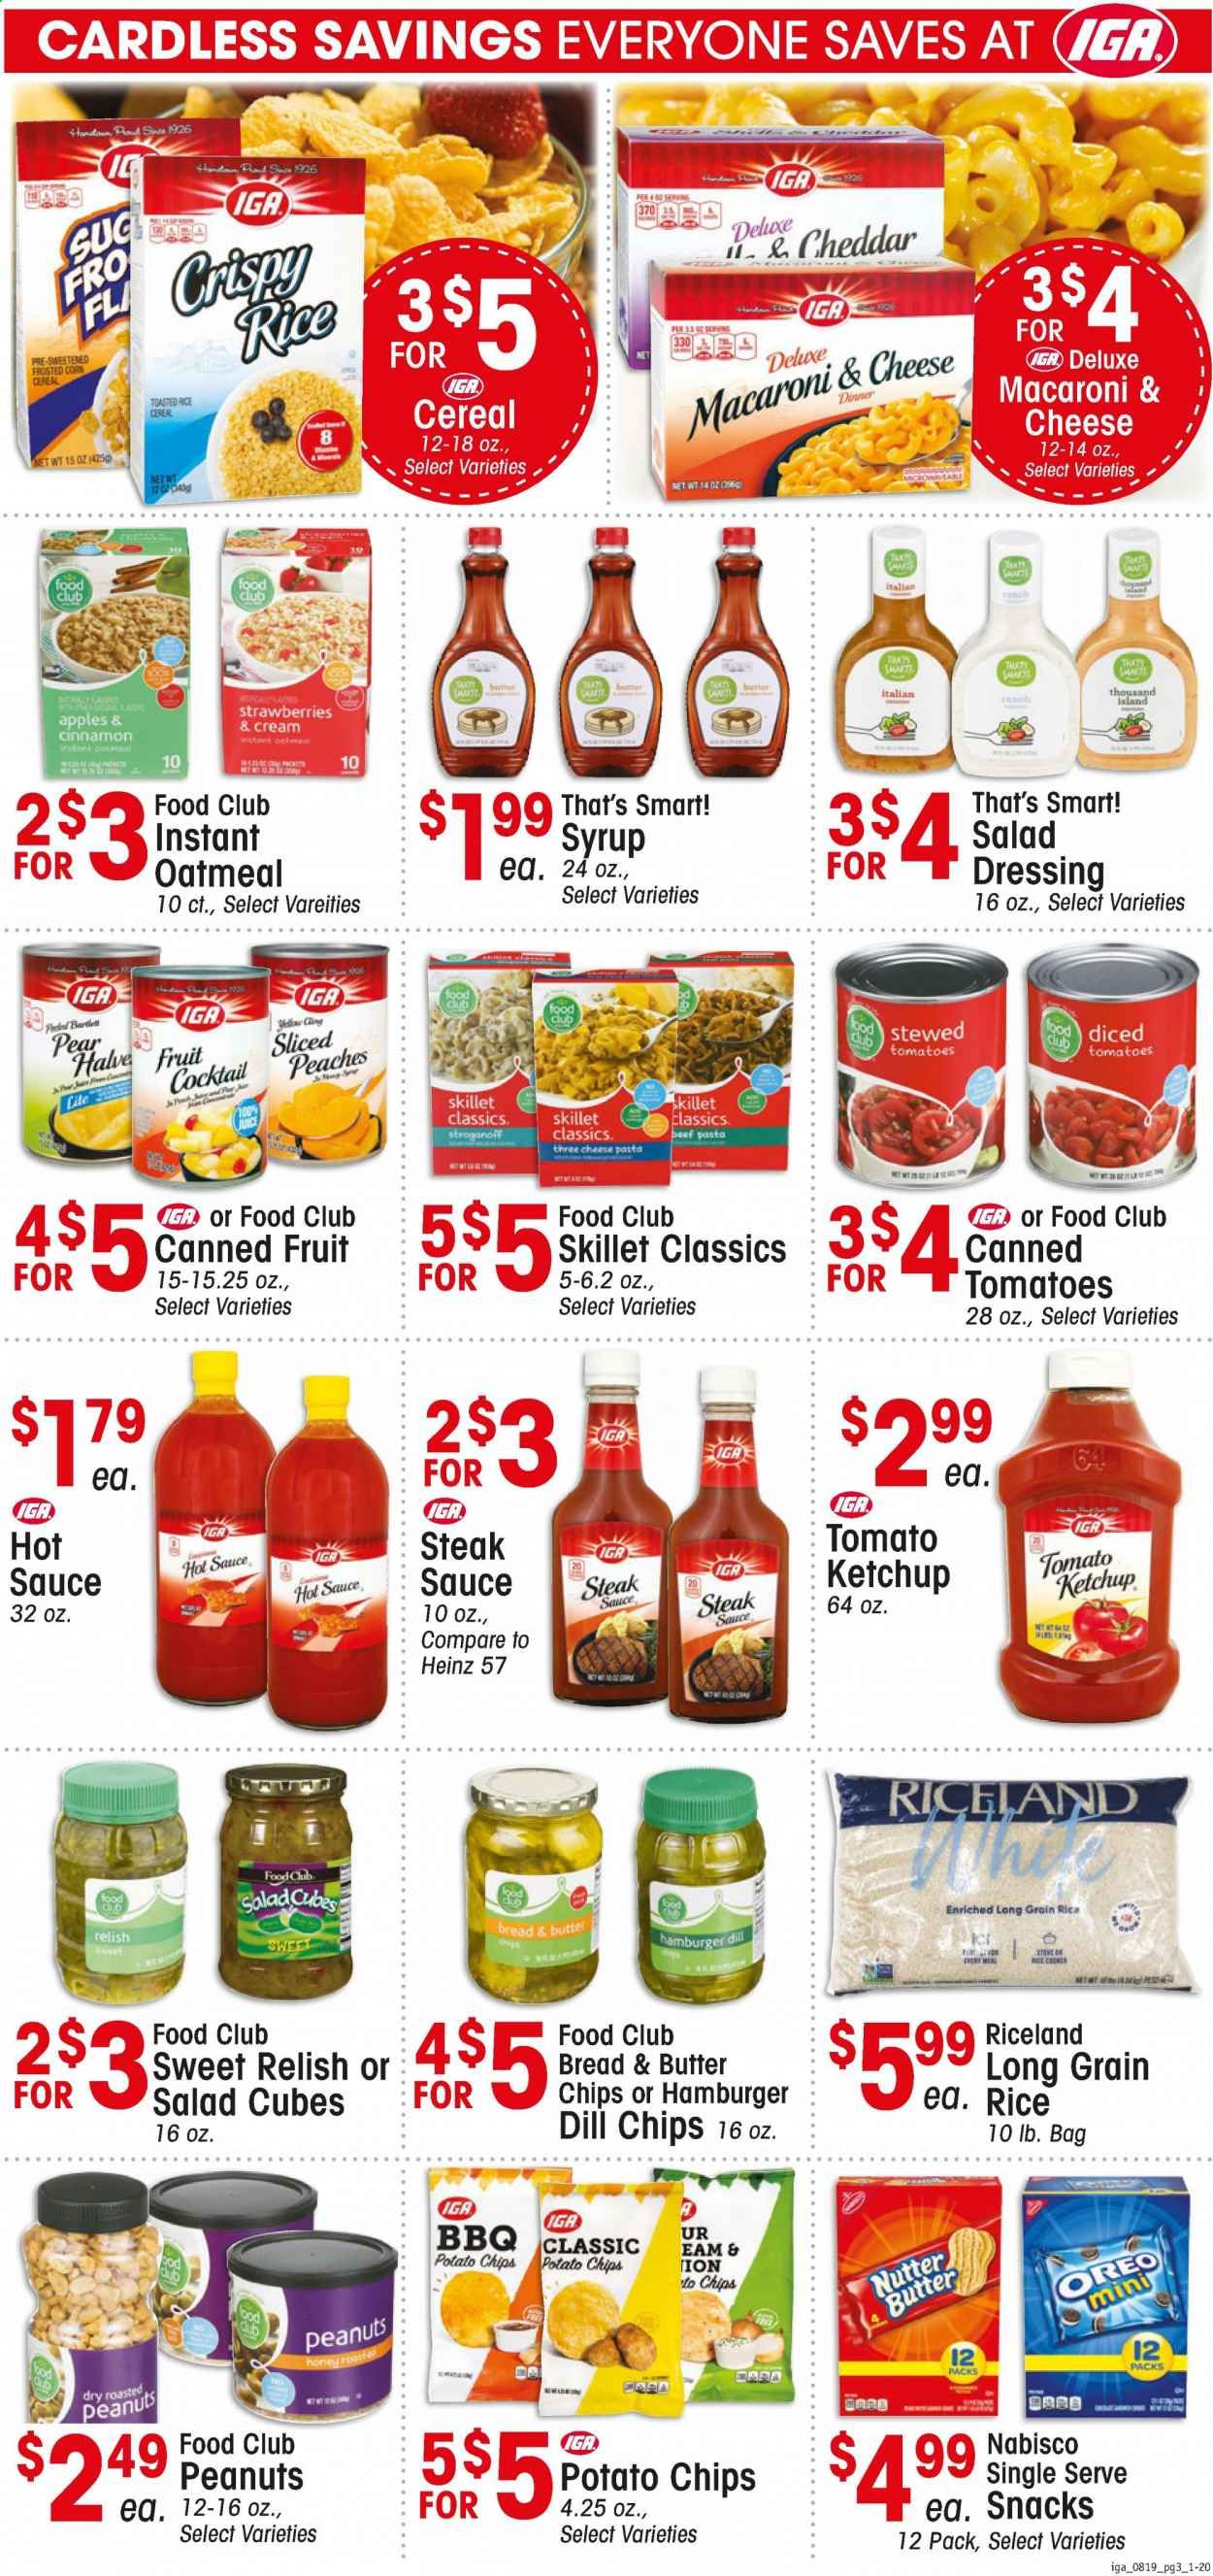 KJ´s Market Weekly Ad August 19 to August 25